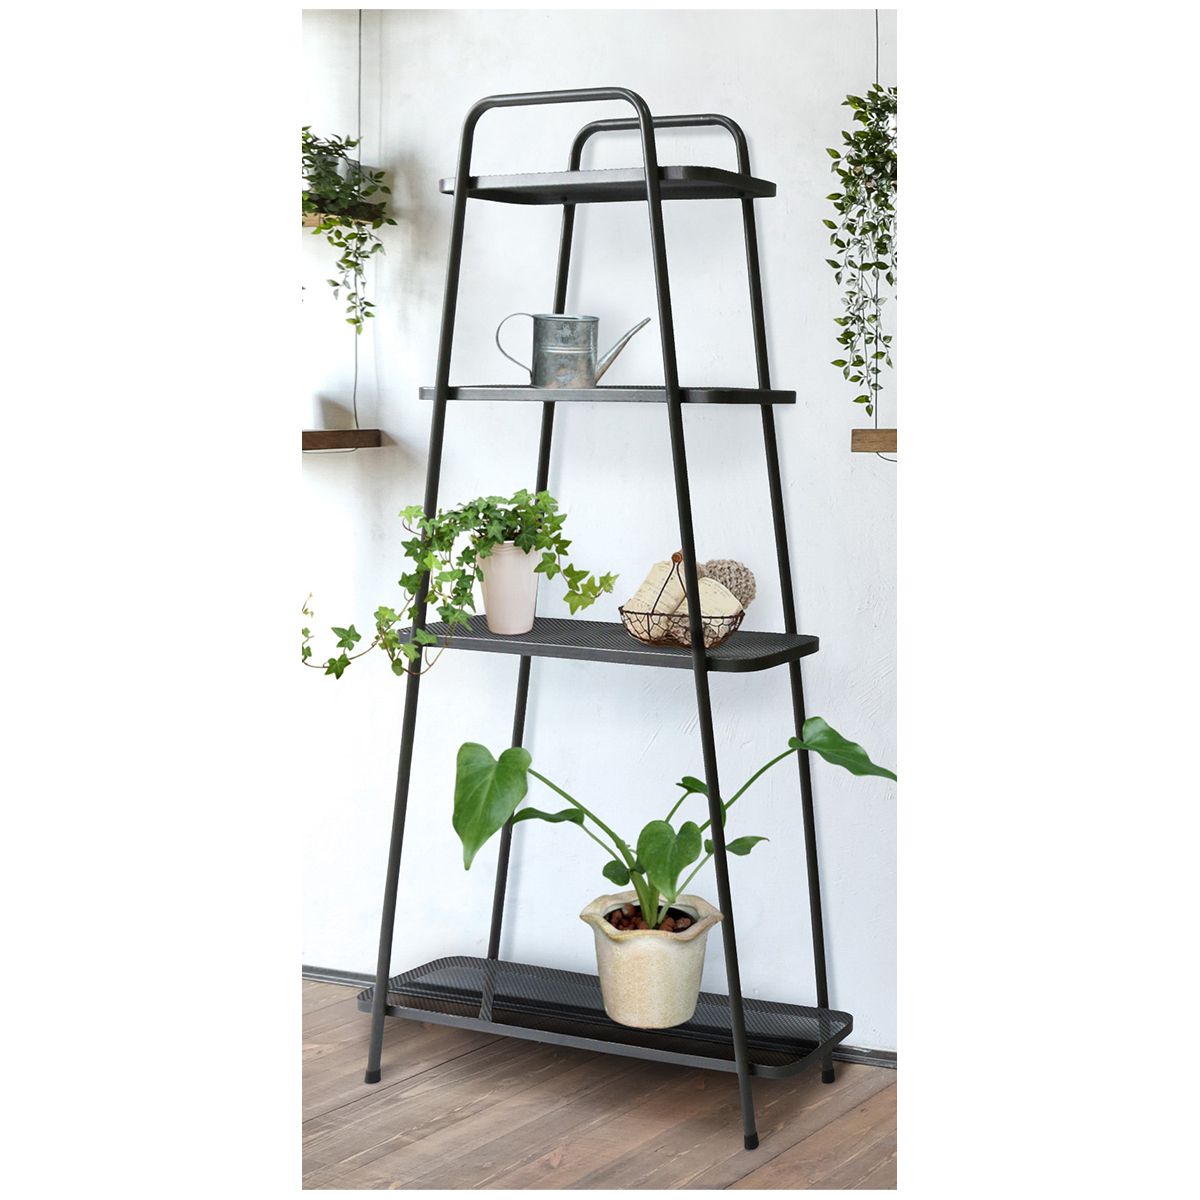 Takasho 4 Tier Modern Plant Stand | Costco Australia For 4 Tier Plant Stands (View 15 of 15)